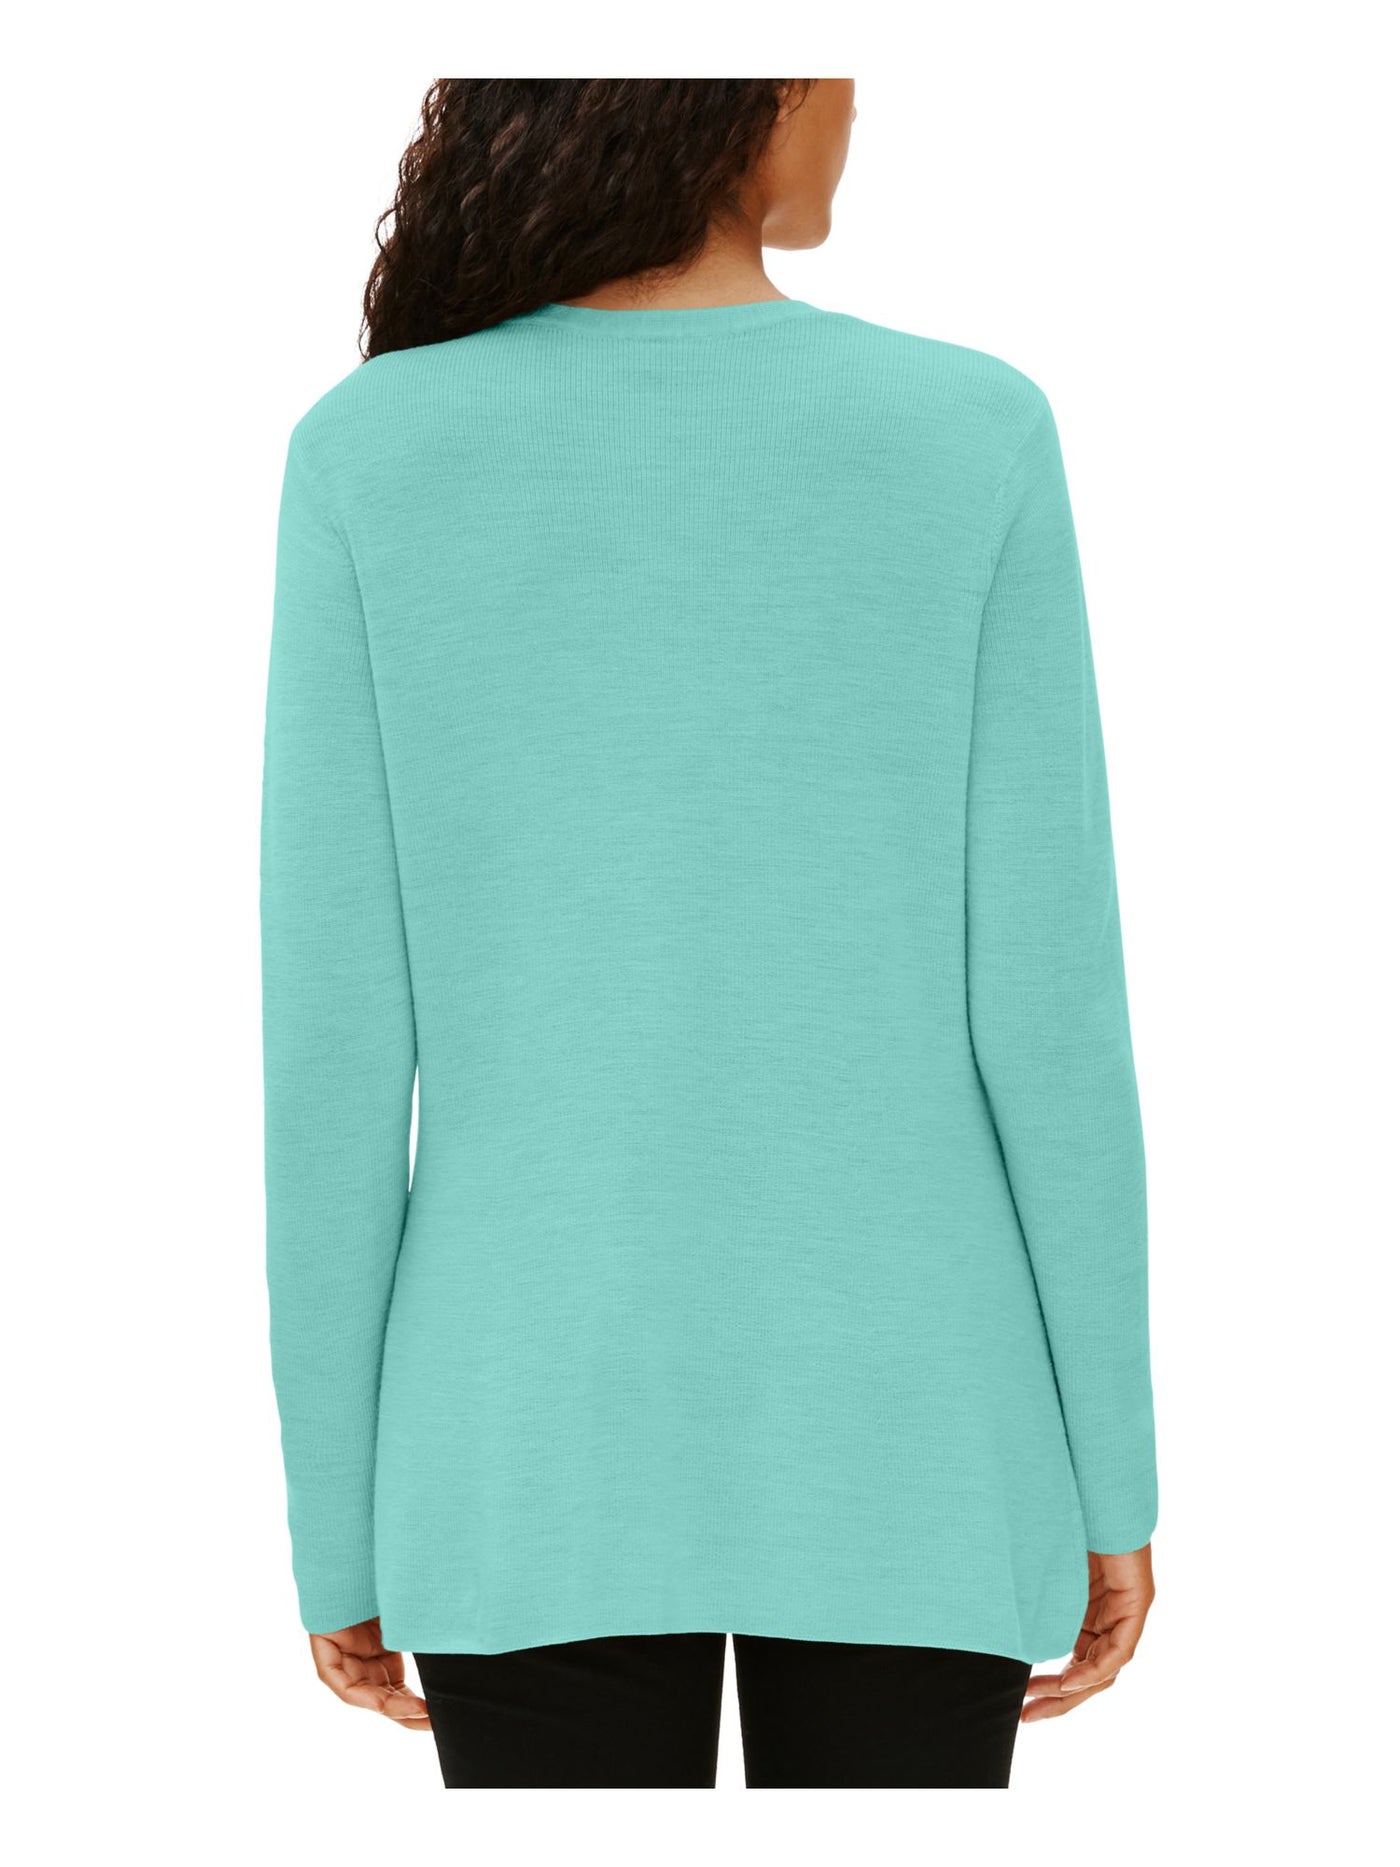 EILEEN FISHER Womens Green Long Sleeve V Neck Sweater Petites S\P